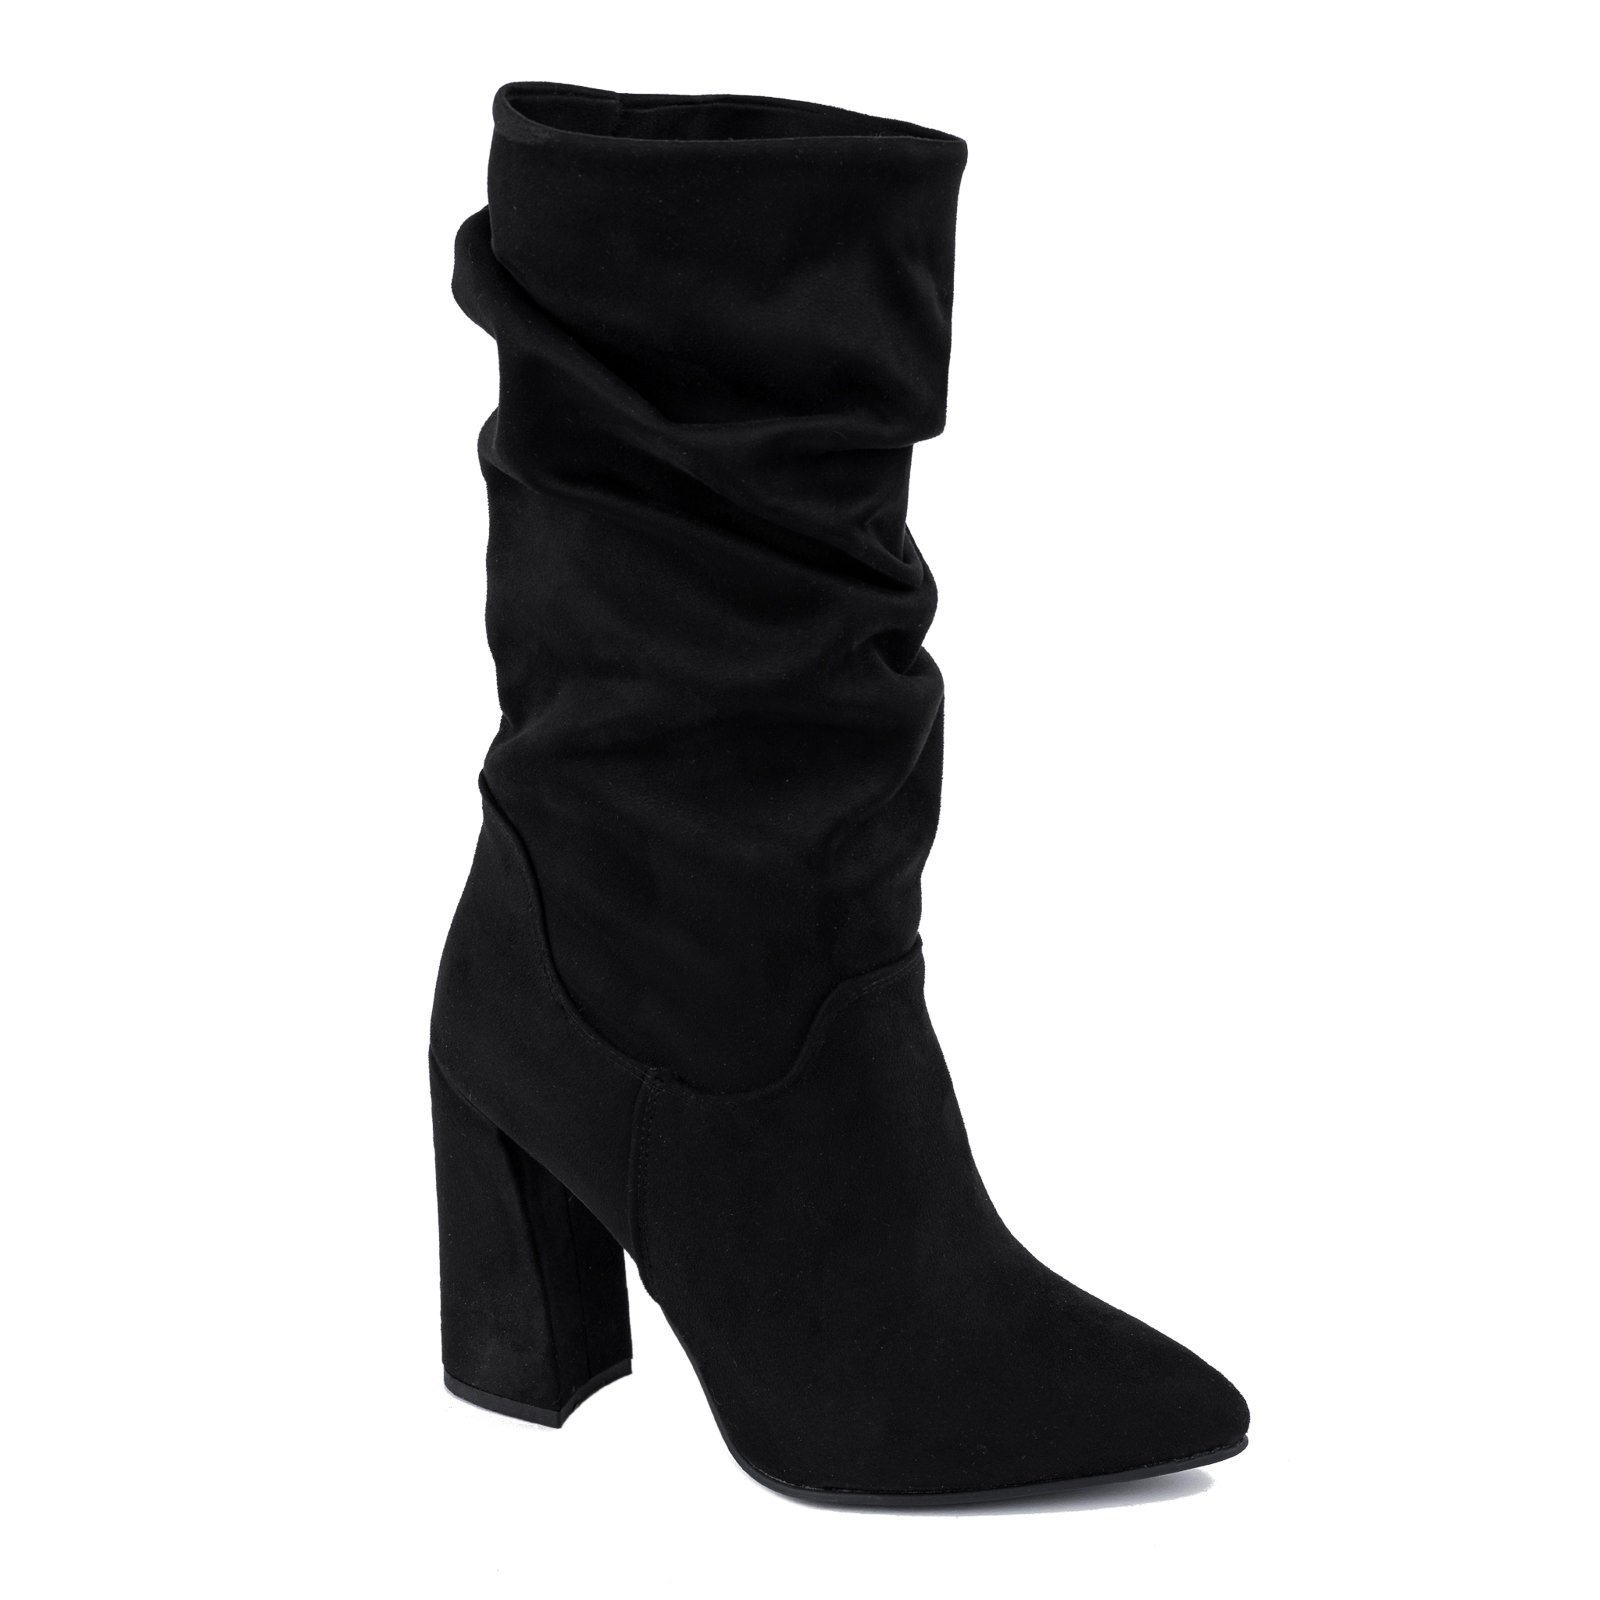 VELOUR WRINKLED ANKLE BOOTS WITH BLOCK HEEL - BLACK